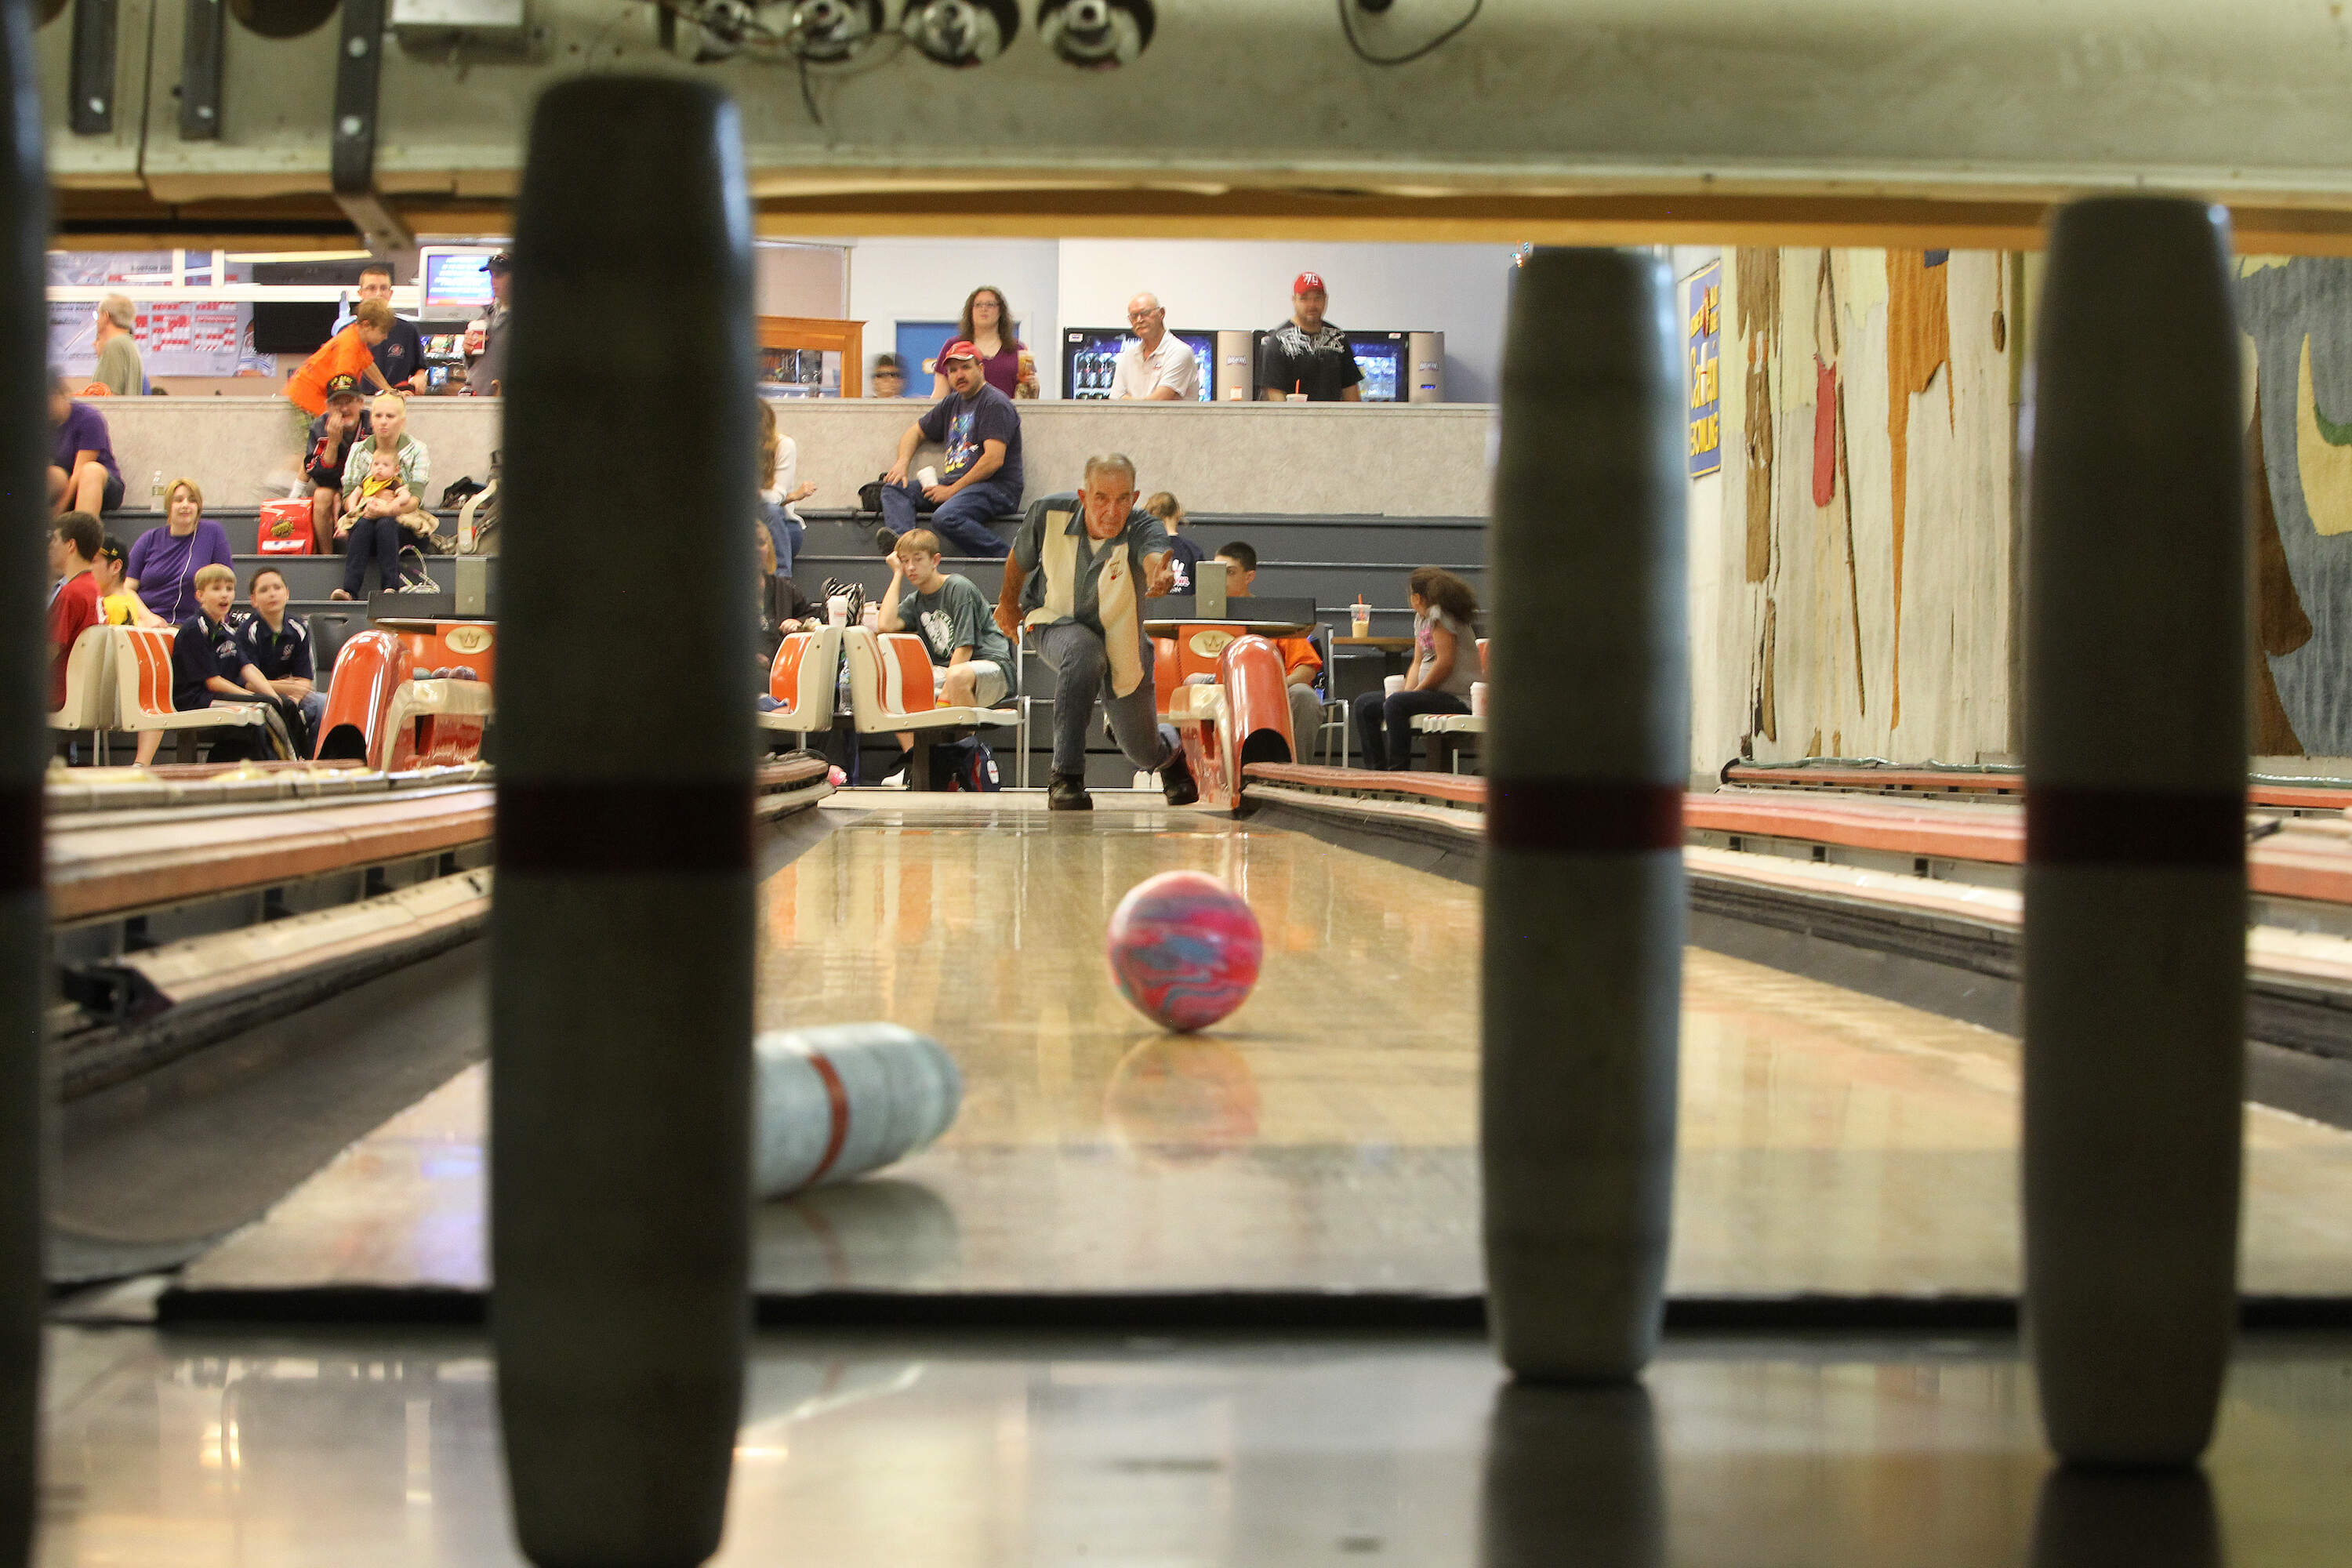 A man bowls at the now-shuttered Pilgrim Lanes in Haverhill. (Stan Grossfeld/The Boston Globe via Getty Images)